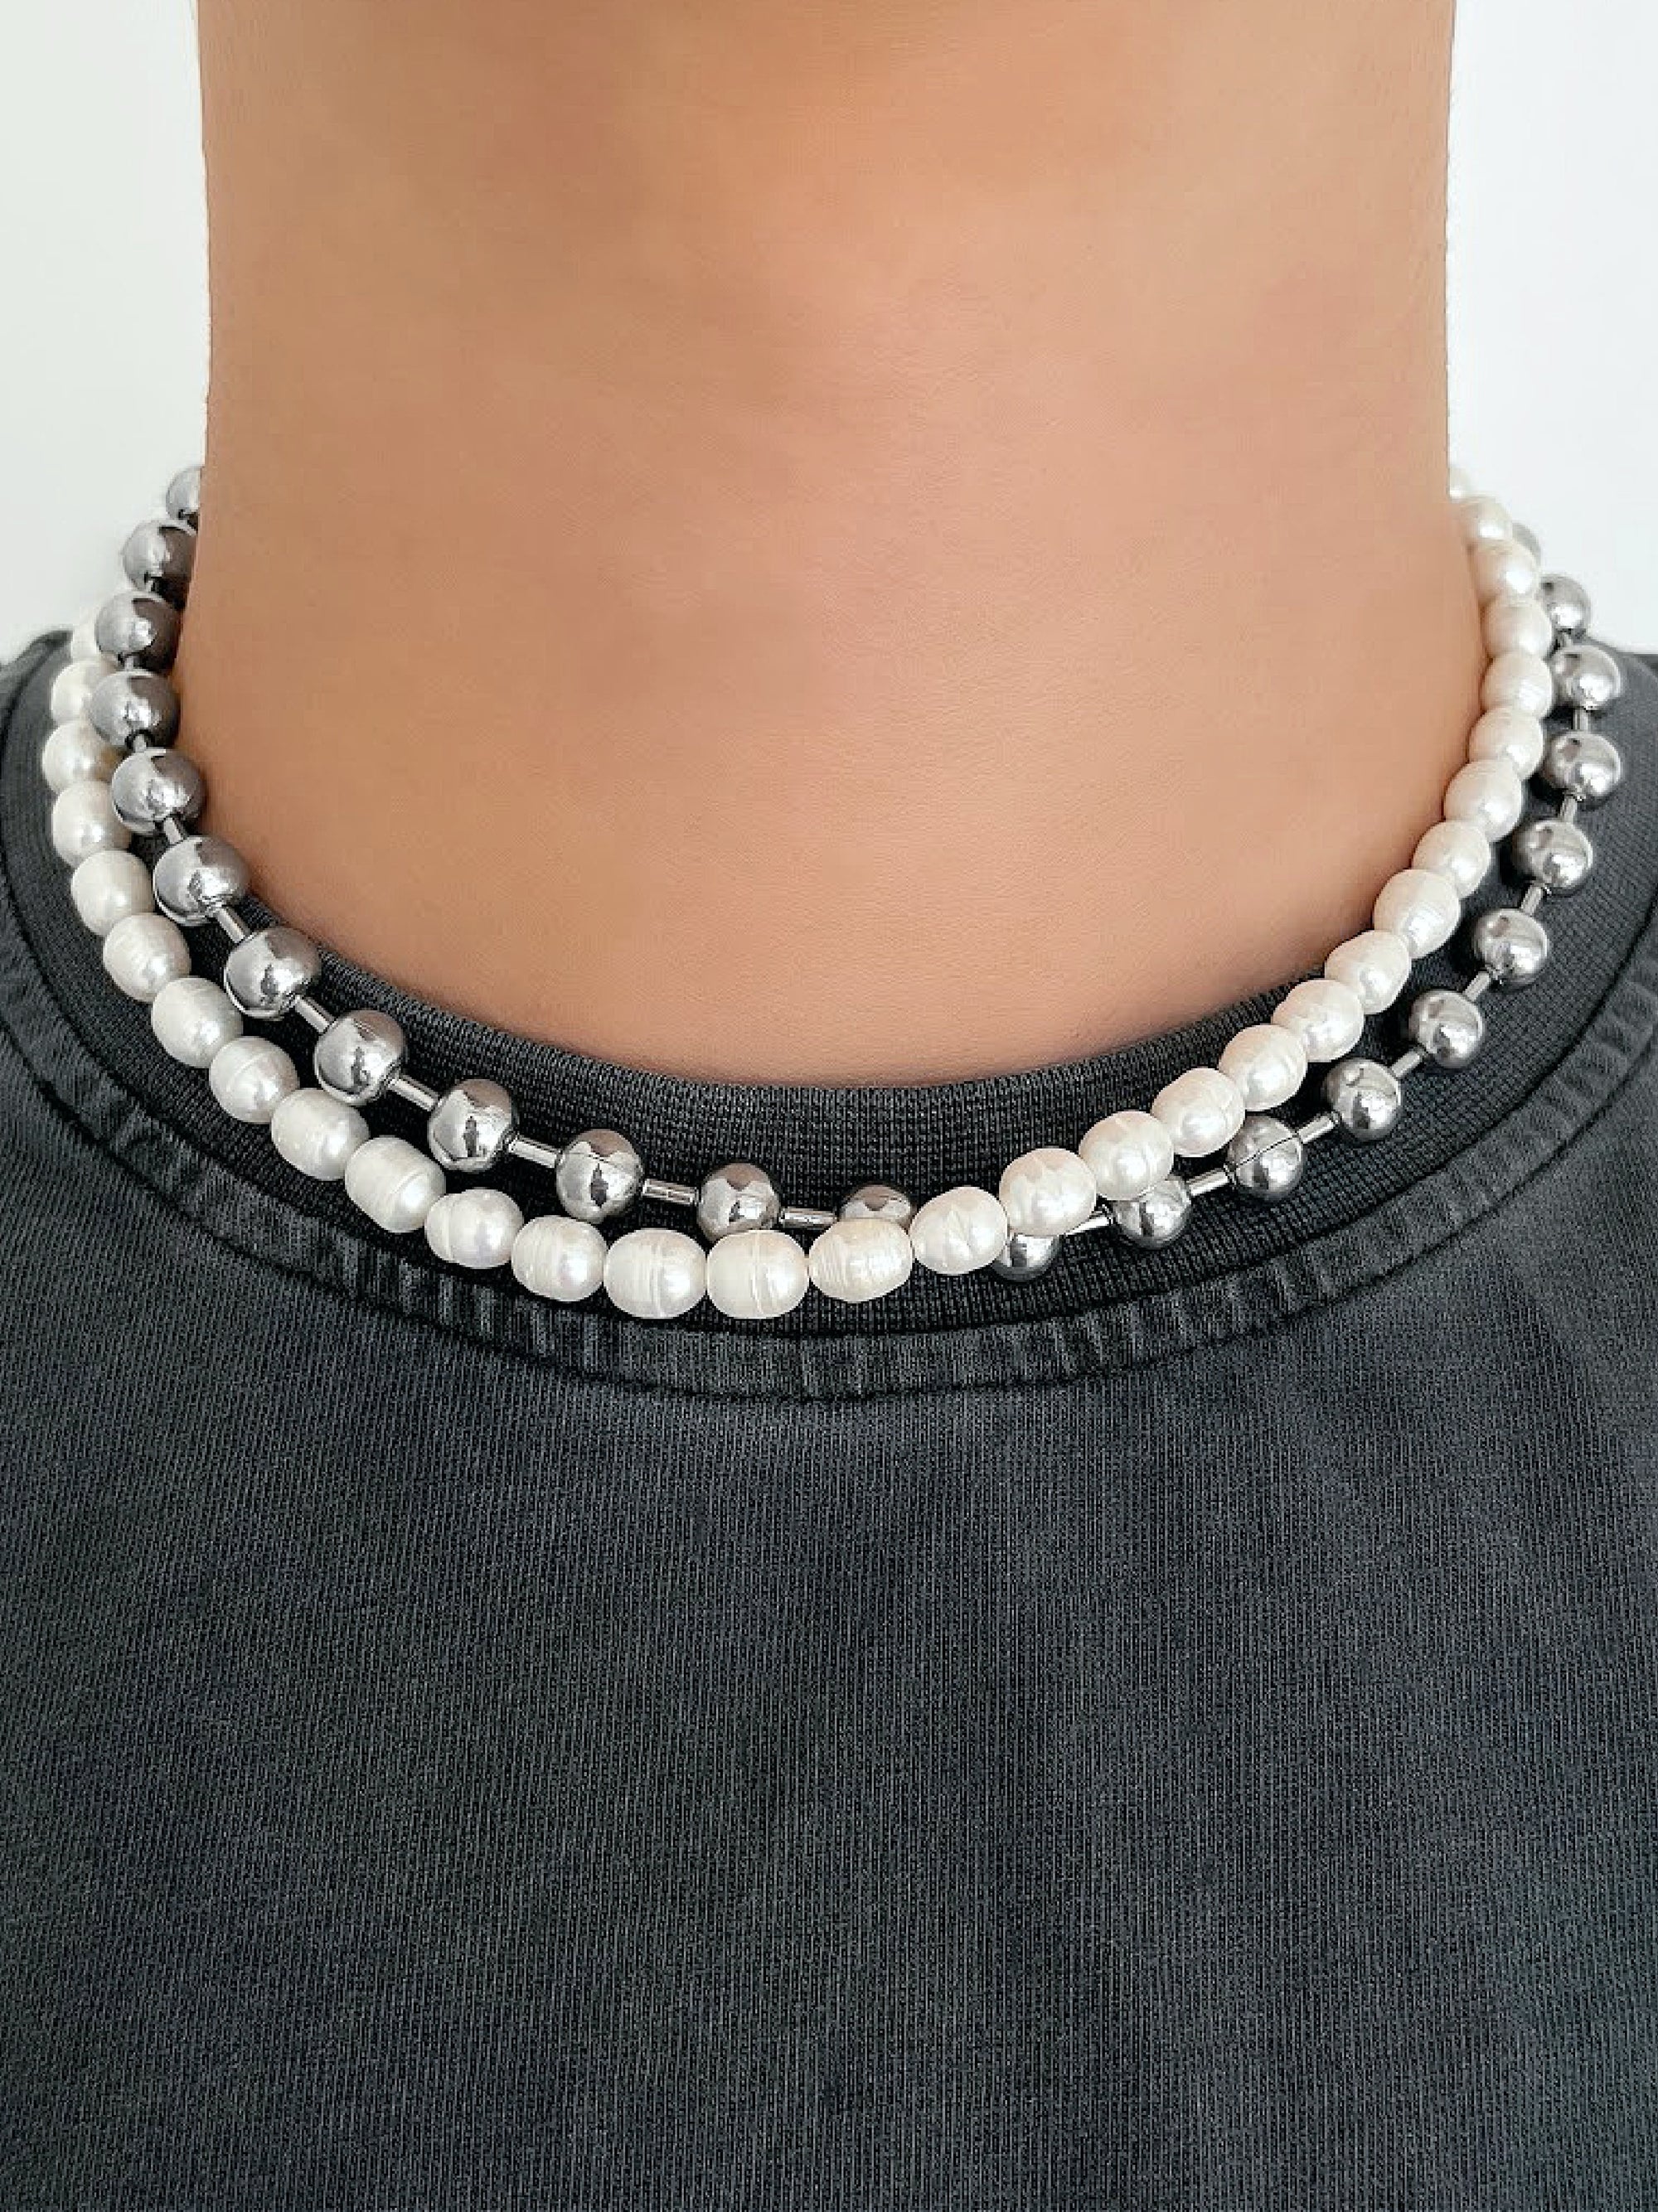 XL BALL CHAIN NECKLACE